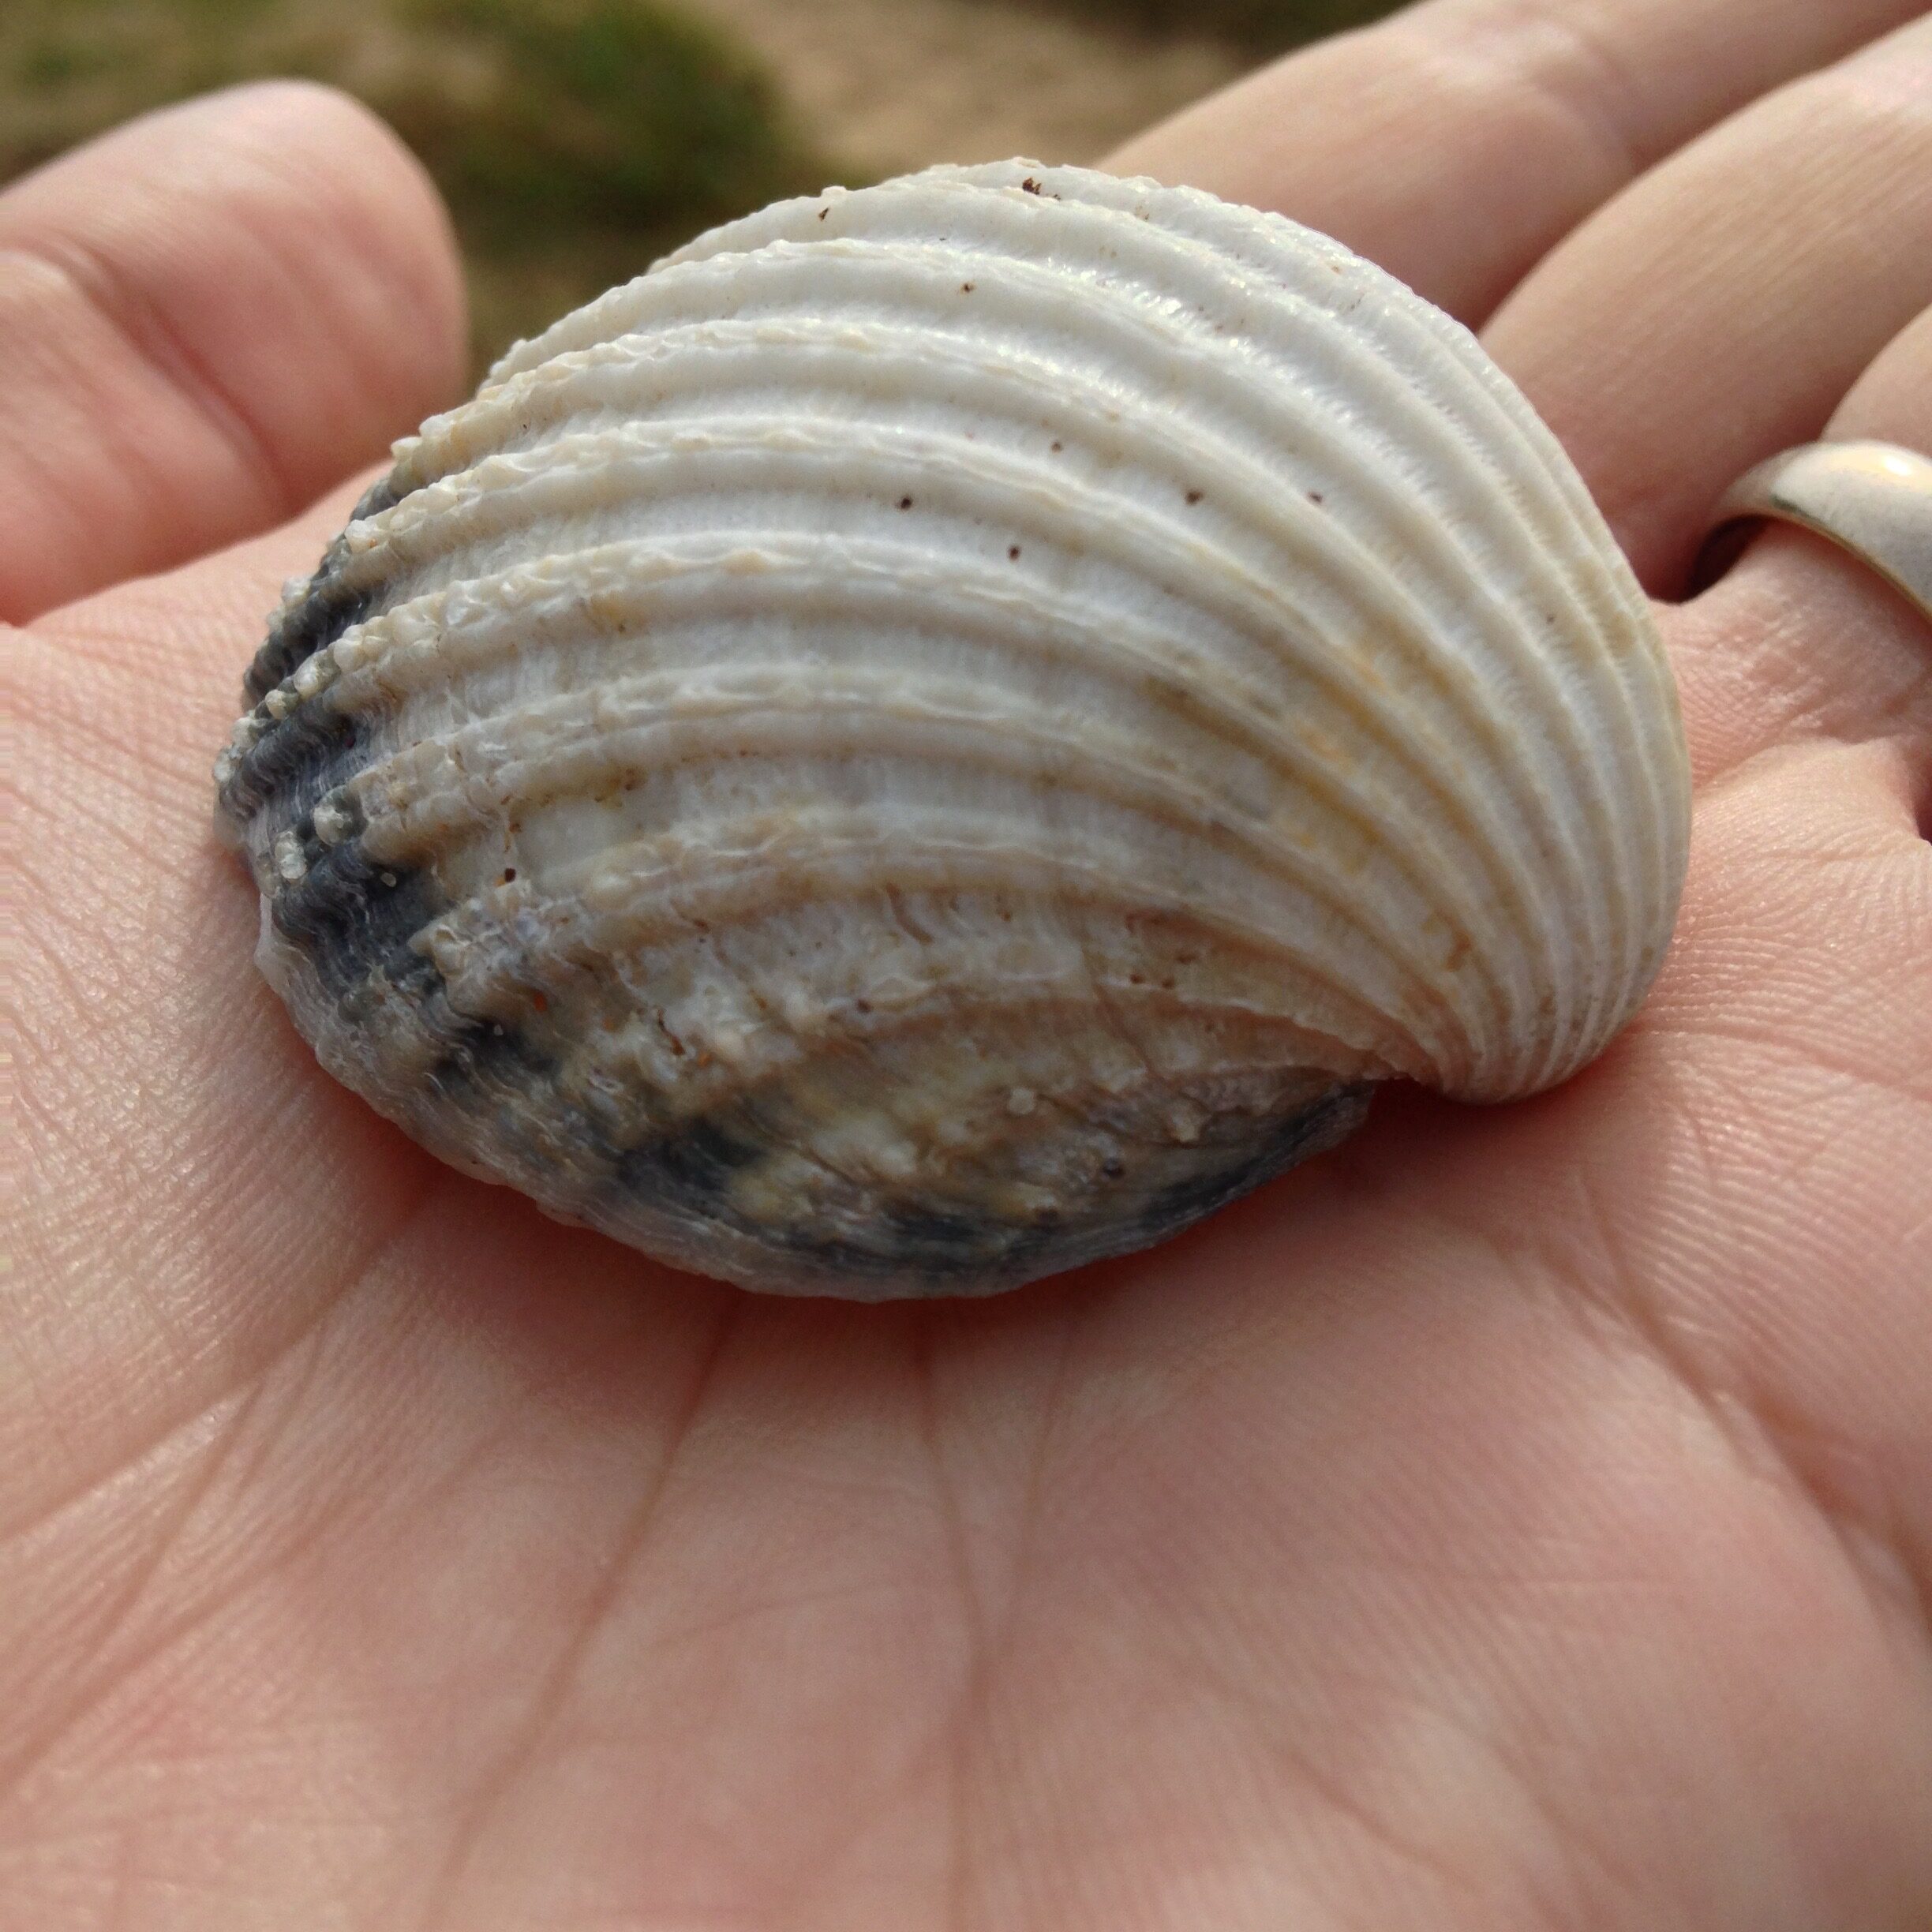 A shell on a hand